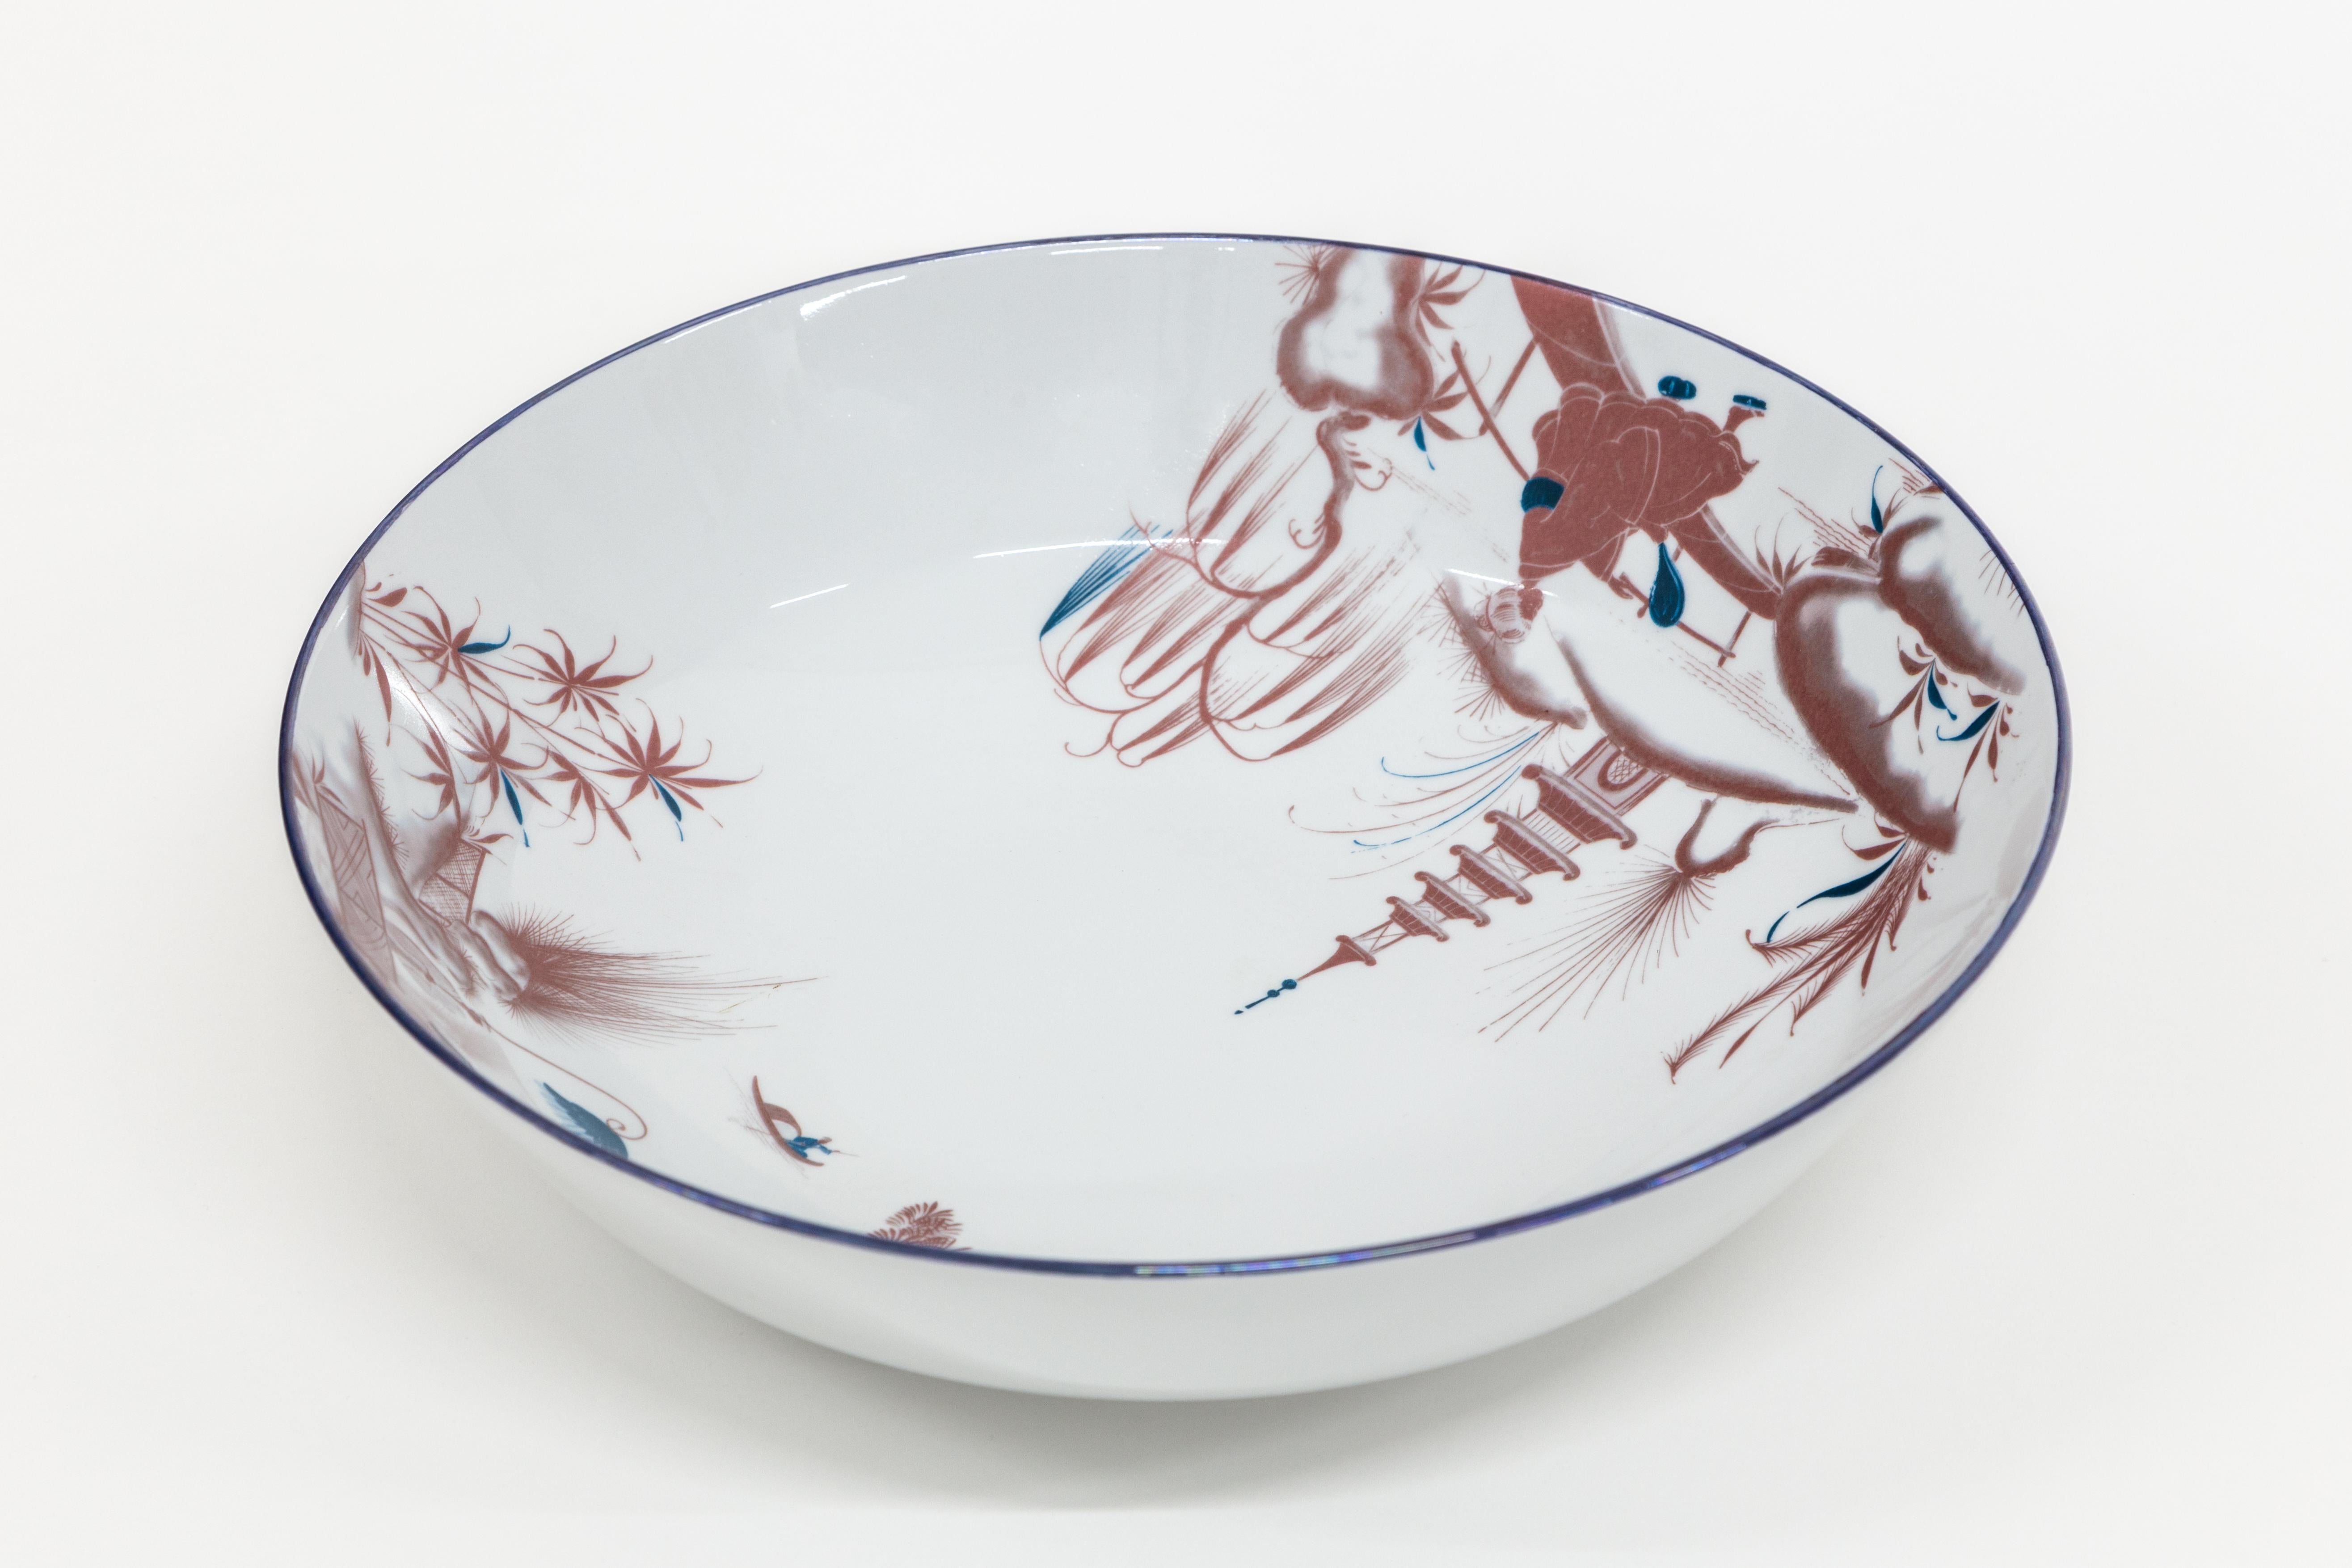 This 34cm diameter bowl is part of the Natsumi collection by Grand Tour By Vito Nesta. The very versatile shape is suitable as a fruit stand, table centerpiece or ornamental bowl on any shelf. In the inner rim of the bowl take place two scenes of